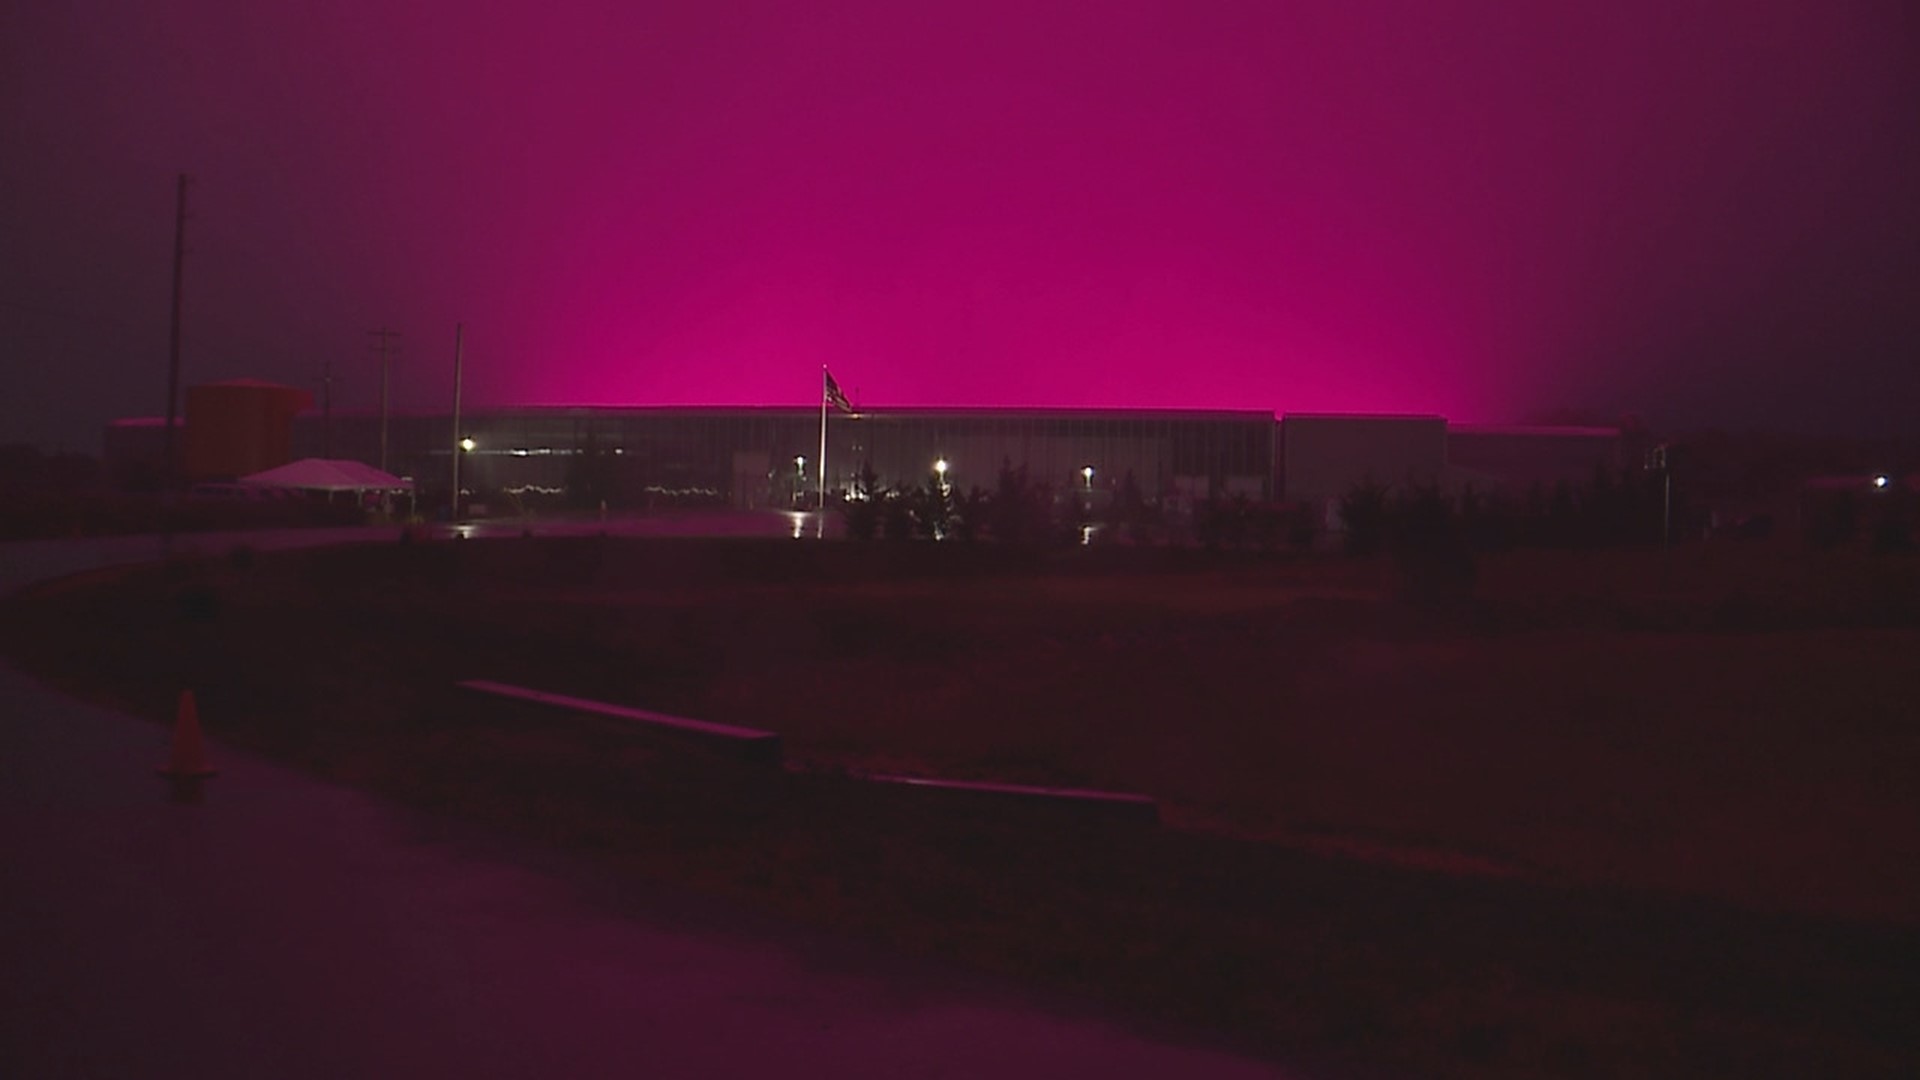 Organic Remedies, a medical marijuana organization in South Central Pennsylvania, lit up the sky over their Carlisle greenhouse pink.